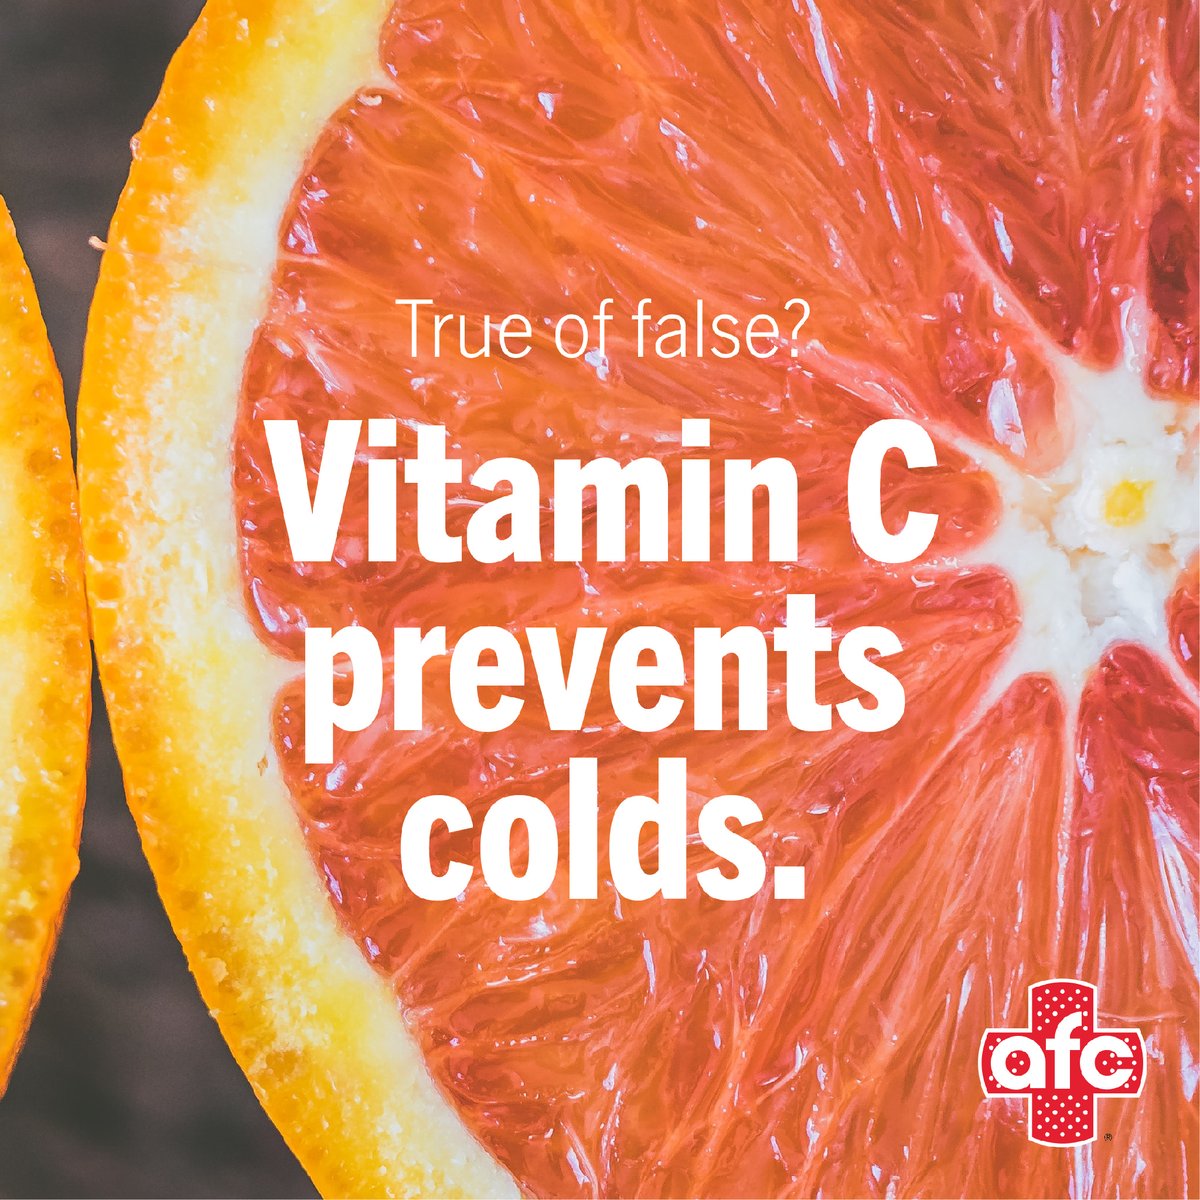 Does citrus stop colds? Find the answer here: bit.ly/DoesVitaminCPr…
#AFCWestChesterVOA #UrgentCareWestChester #WestChesterWellness #UrgentCareNearMe #VOAUrgentCare